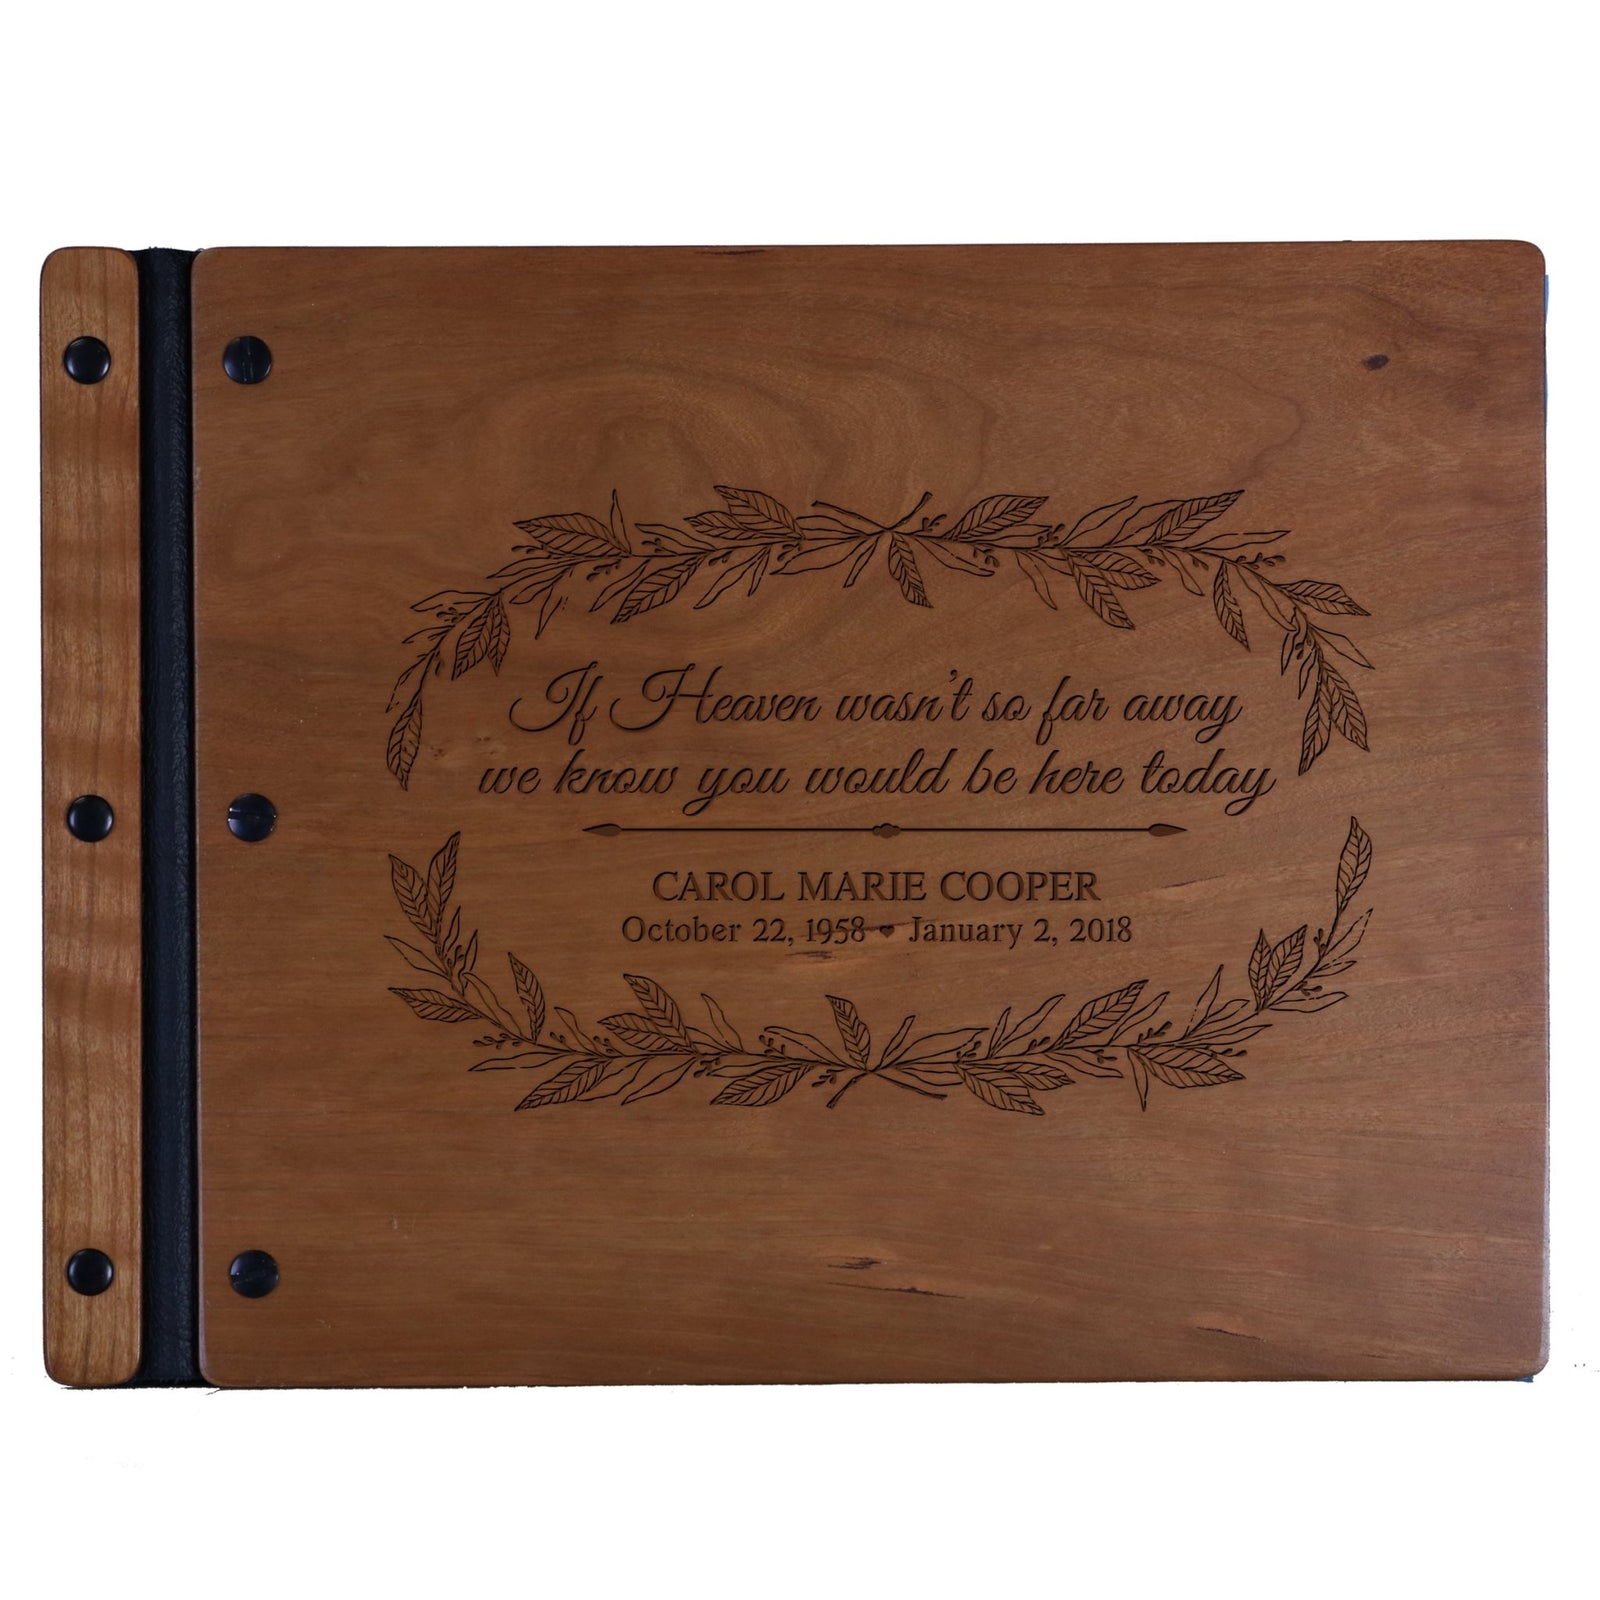 Personalized Memorial Guest Book - If Heaven - LifeSong Milestones